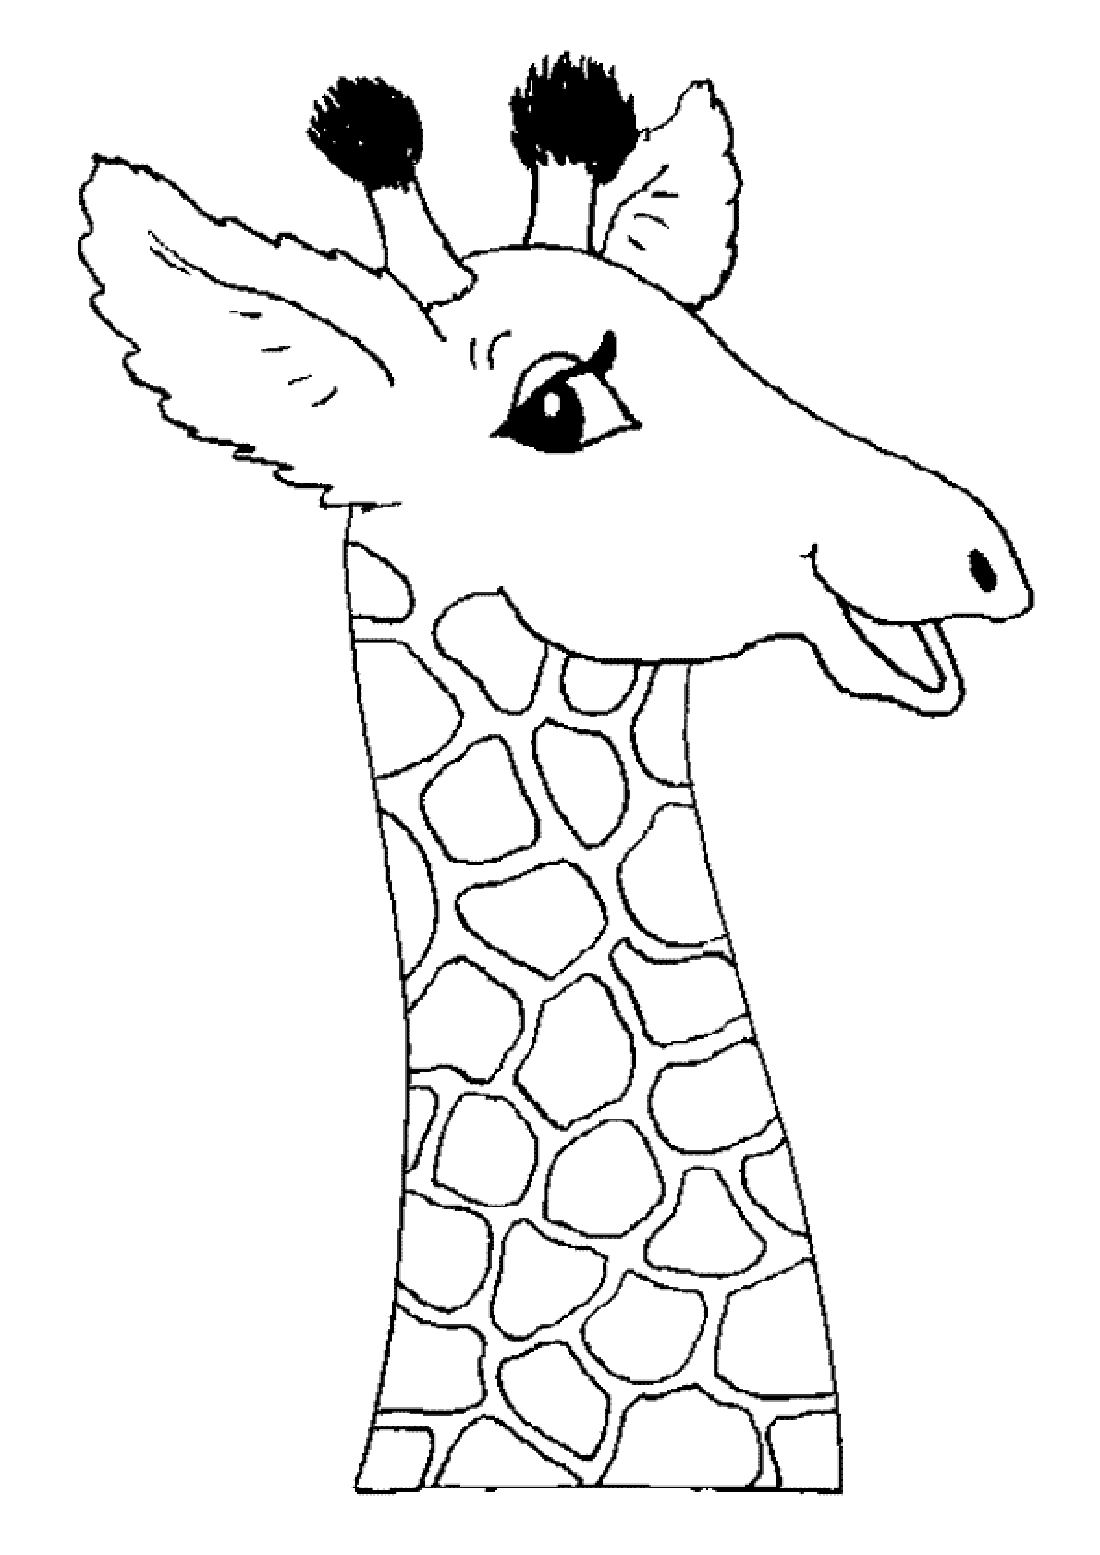 With its beautiful eye, this giraffe is a great coloring!